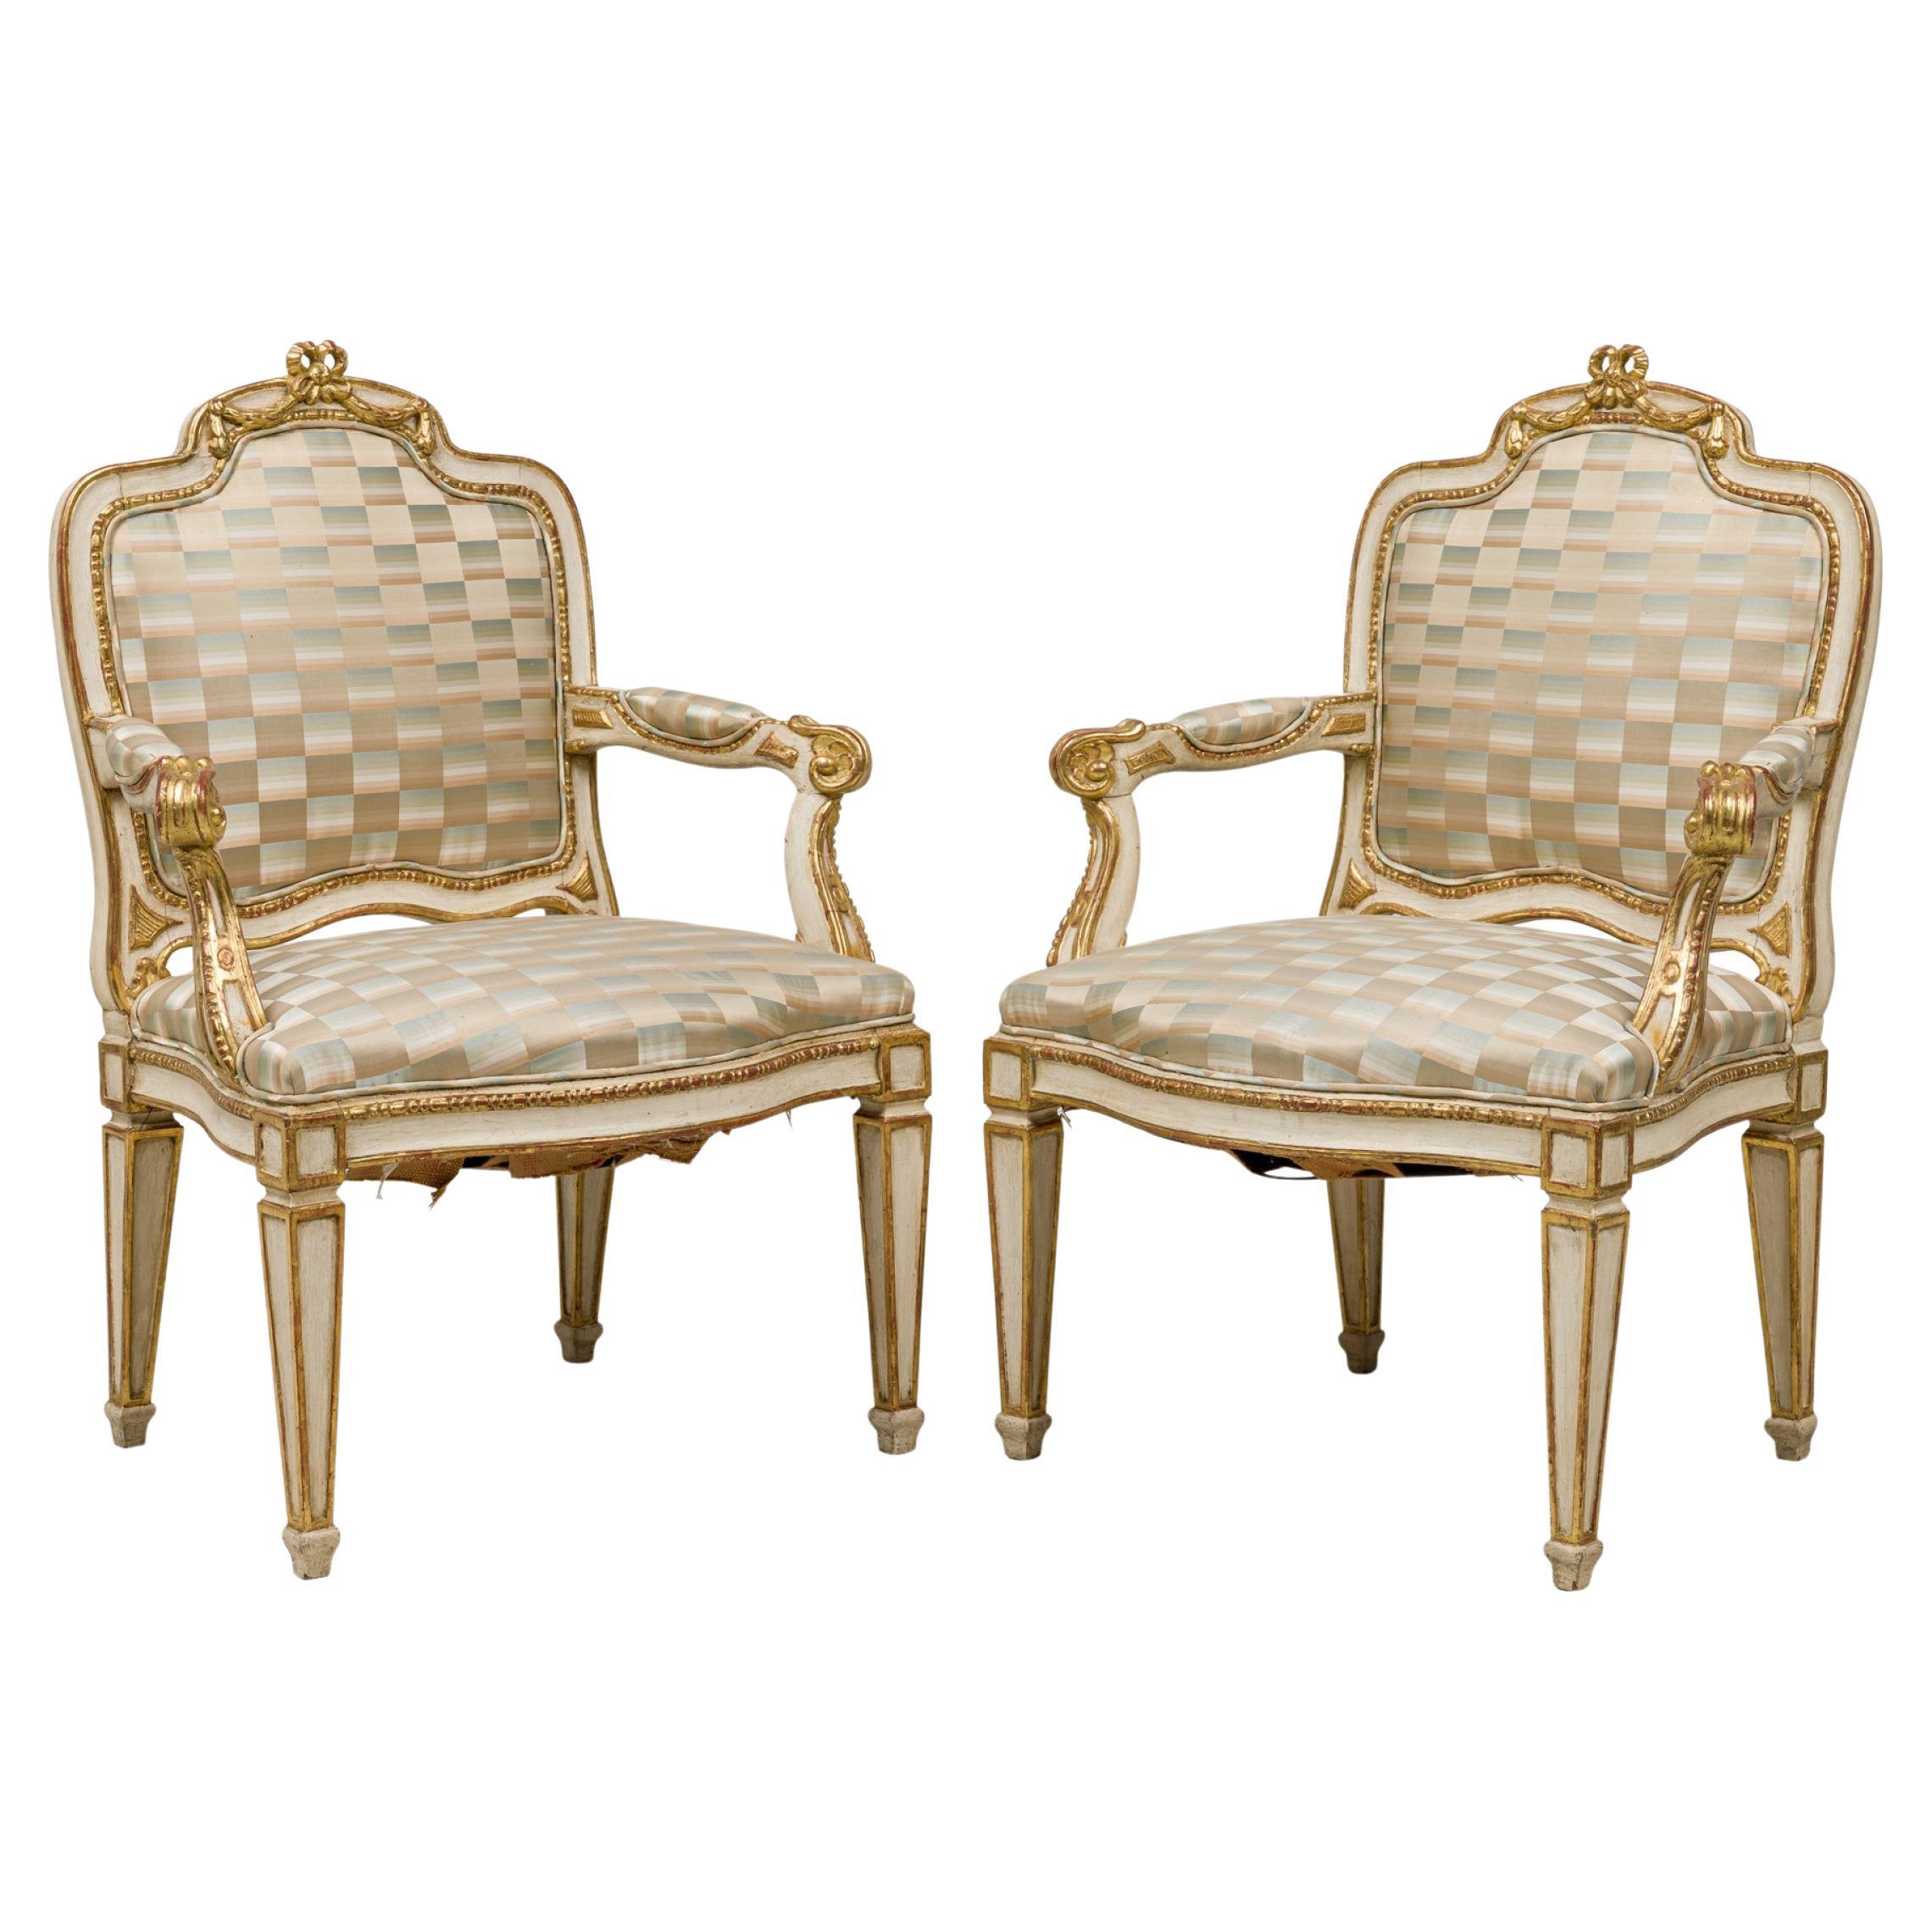 What is a gilt chair?